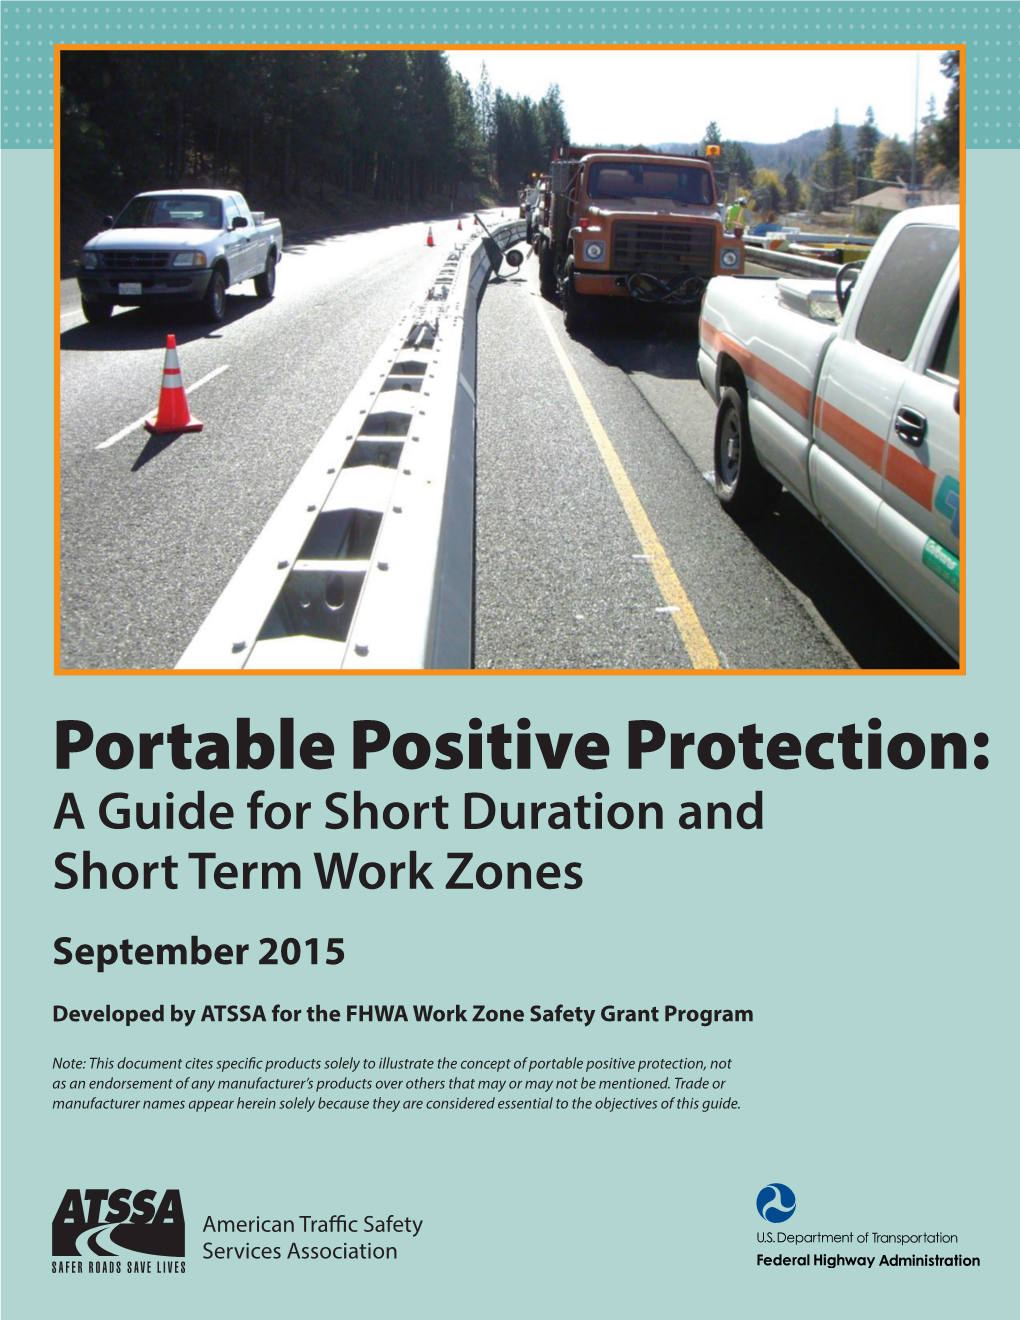 Portable Positive Protection: a Guide for Short Duration and Short Term Work Zones September 2015